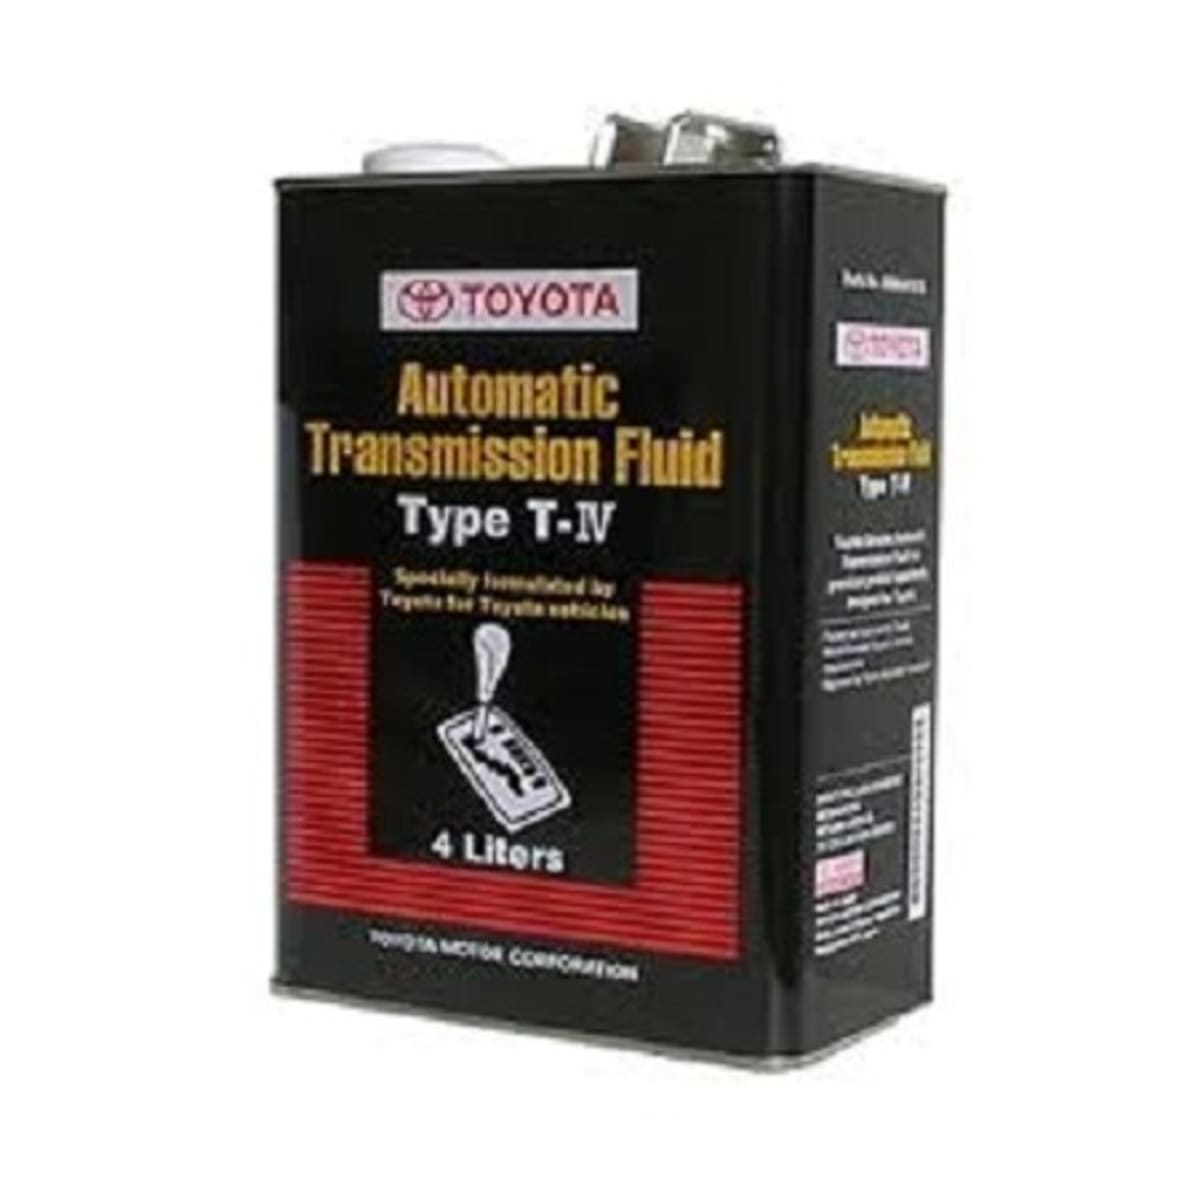 Масло тайп. 0888681015 Toyota Type t-IV масло АКПП , 4 Л.. Toyota auto Fluid Type t-IV. ATF Fluid t-4 Toyota. Automatic transmission Fluid Type t-4 Toyota.